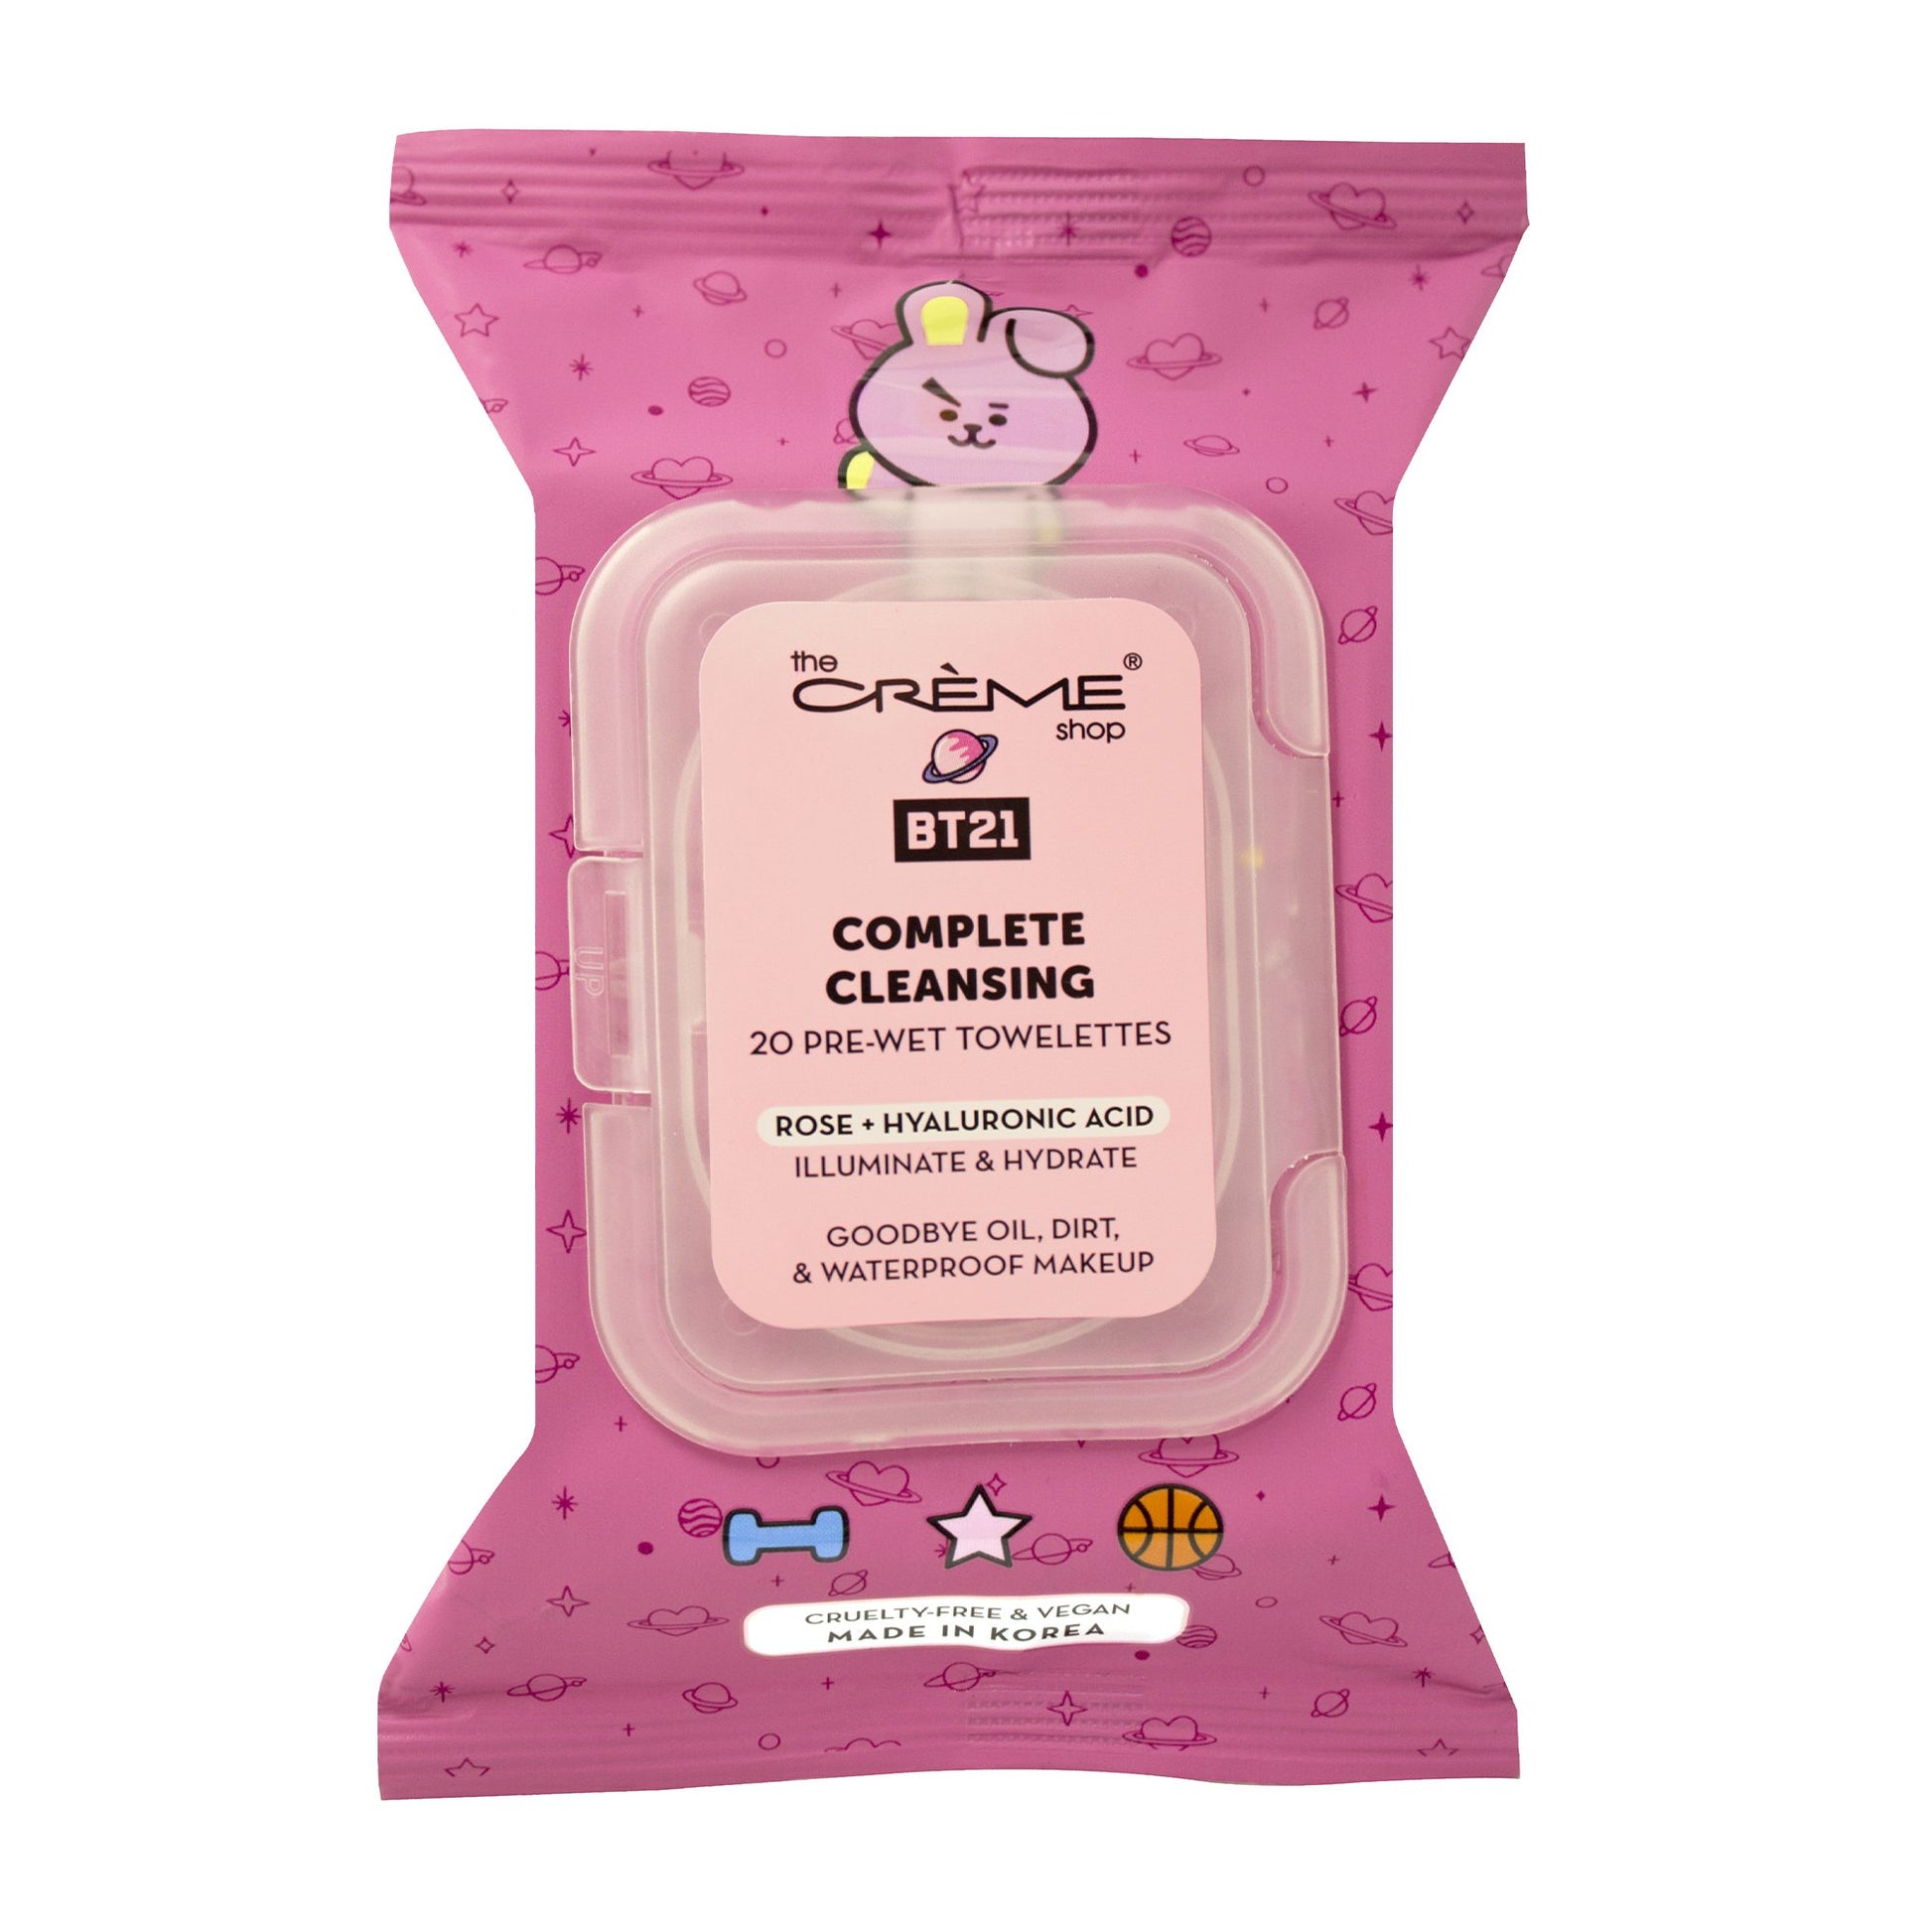 COOKY Complete Cleansing Towelettes - Rose & Hyaluronic Acid (20 Pre-Wet Towelettes) Towelettes The Crème Shop x BT21 